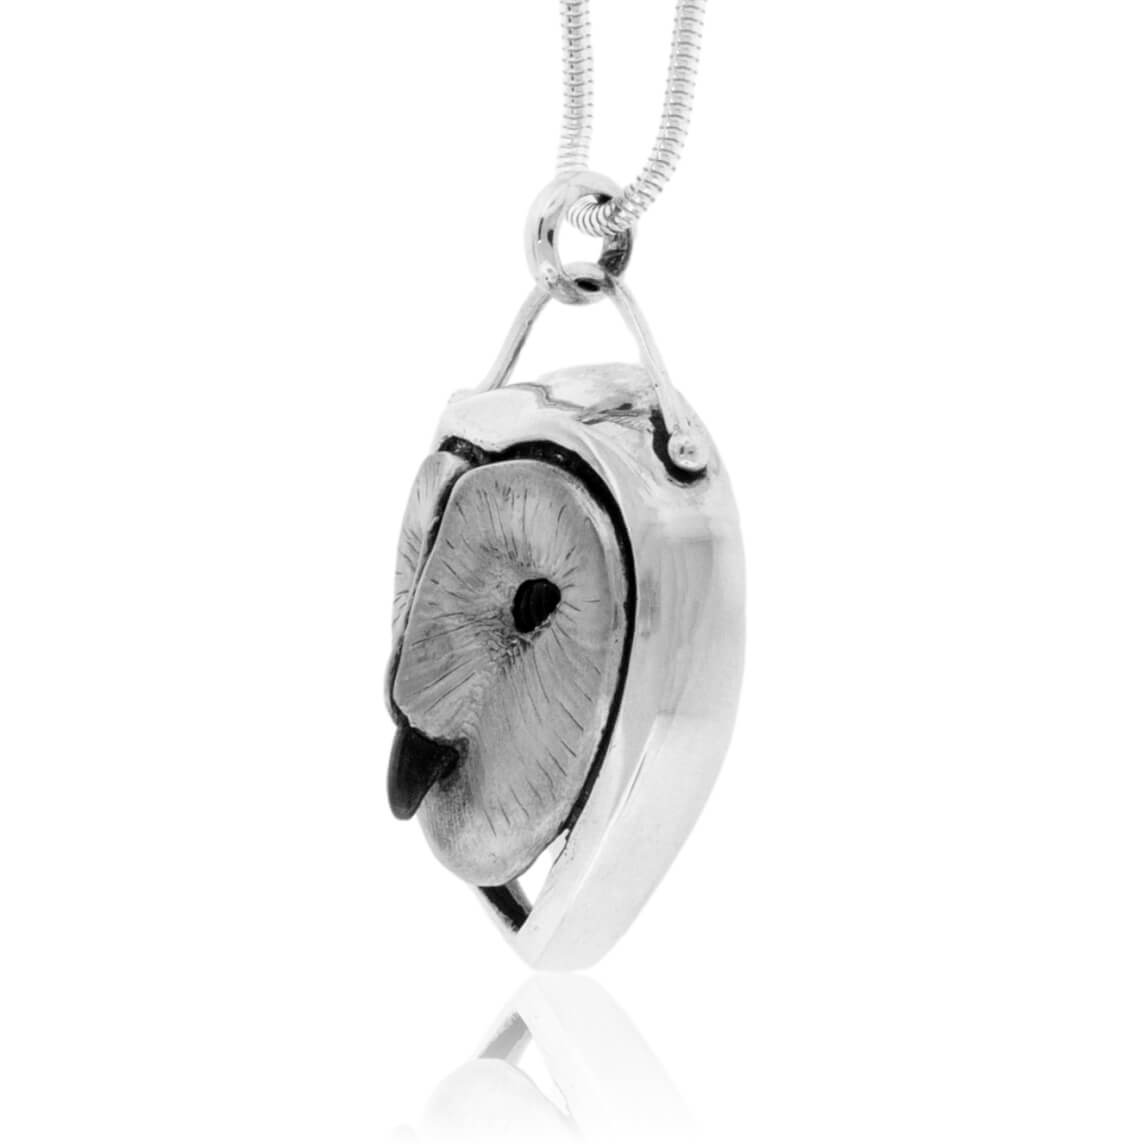 Sterling Silver Barn Owl Pendant w/Chain - Park City Jewelers